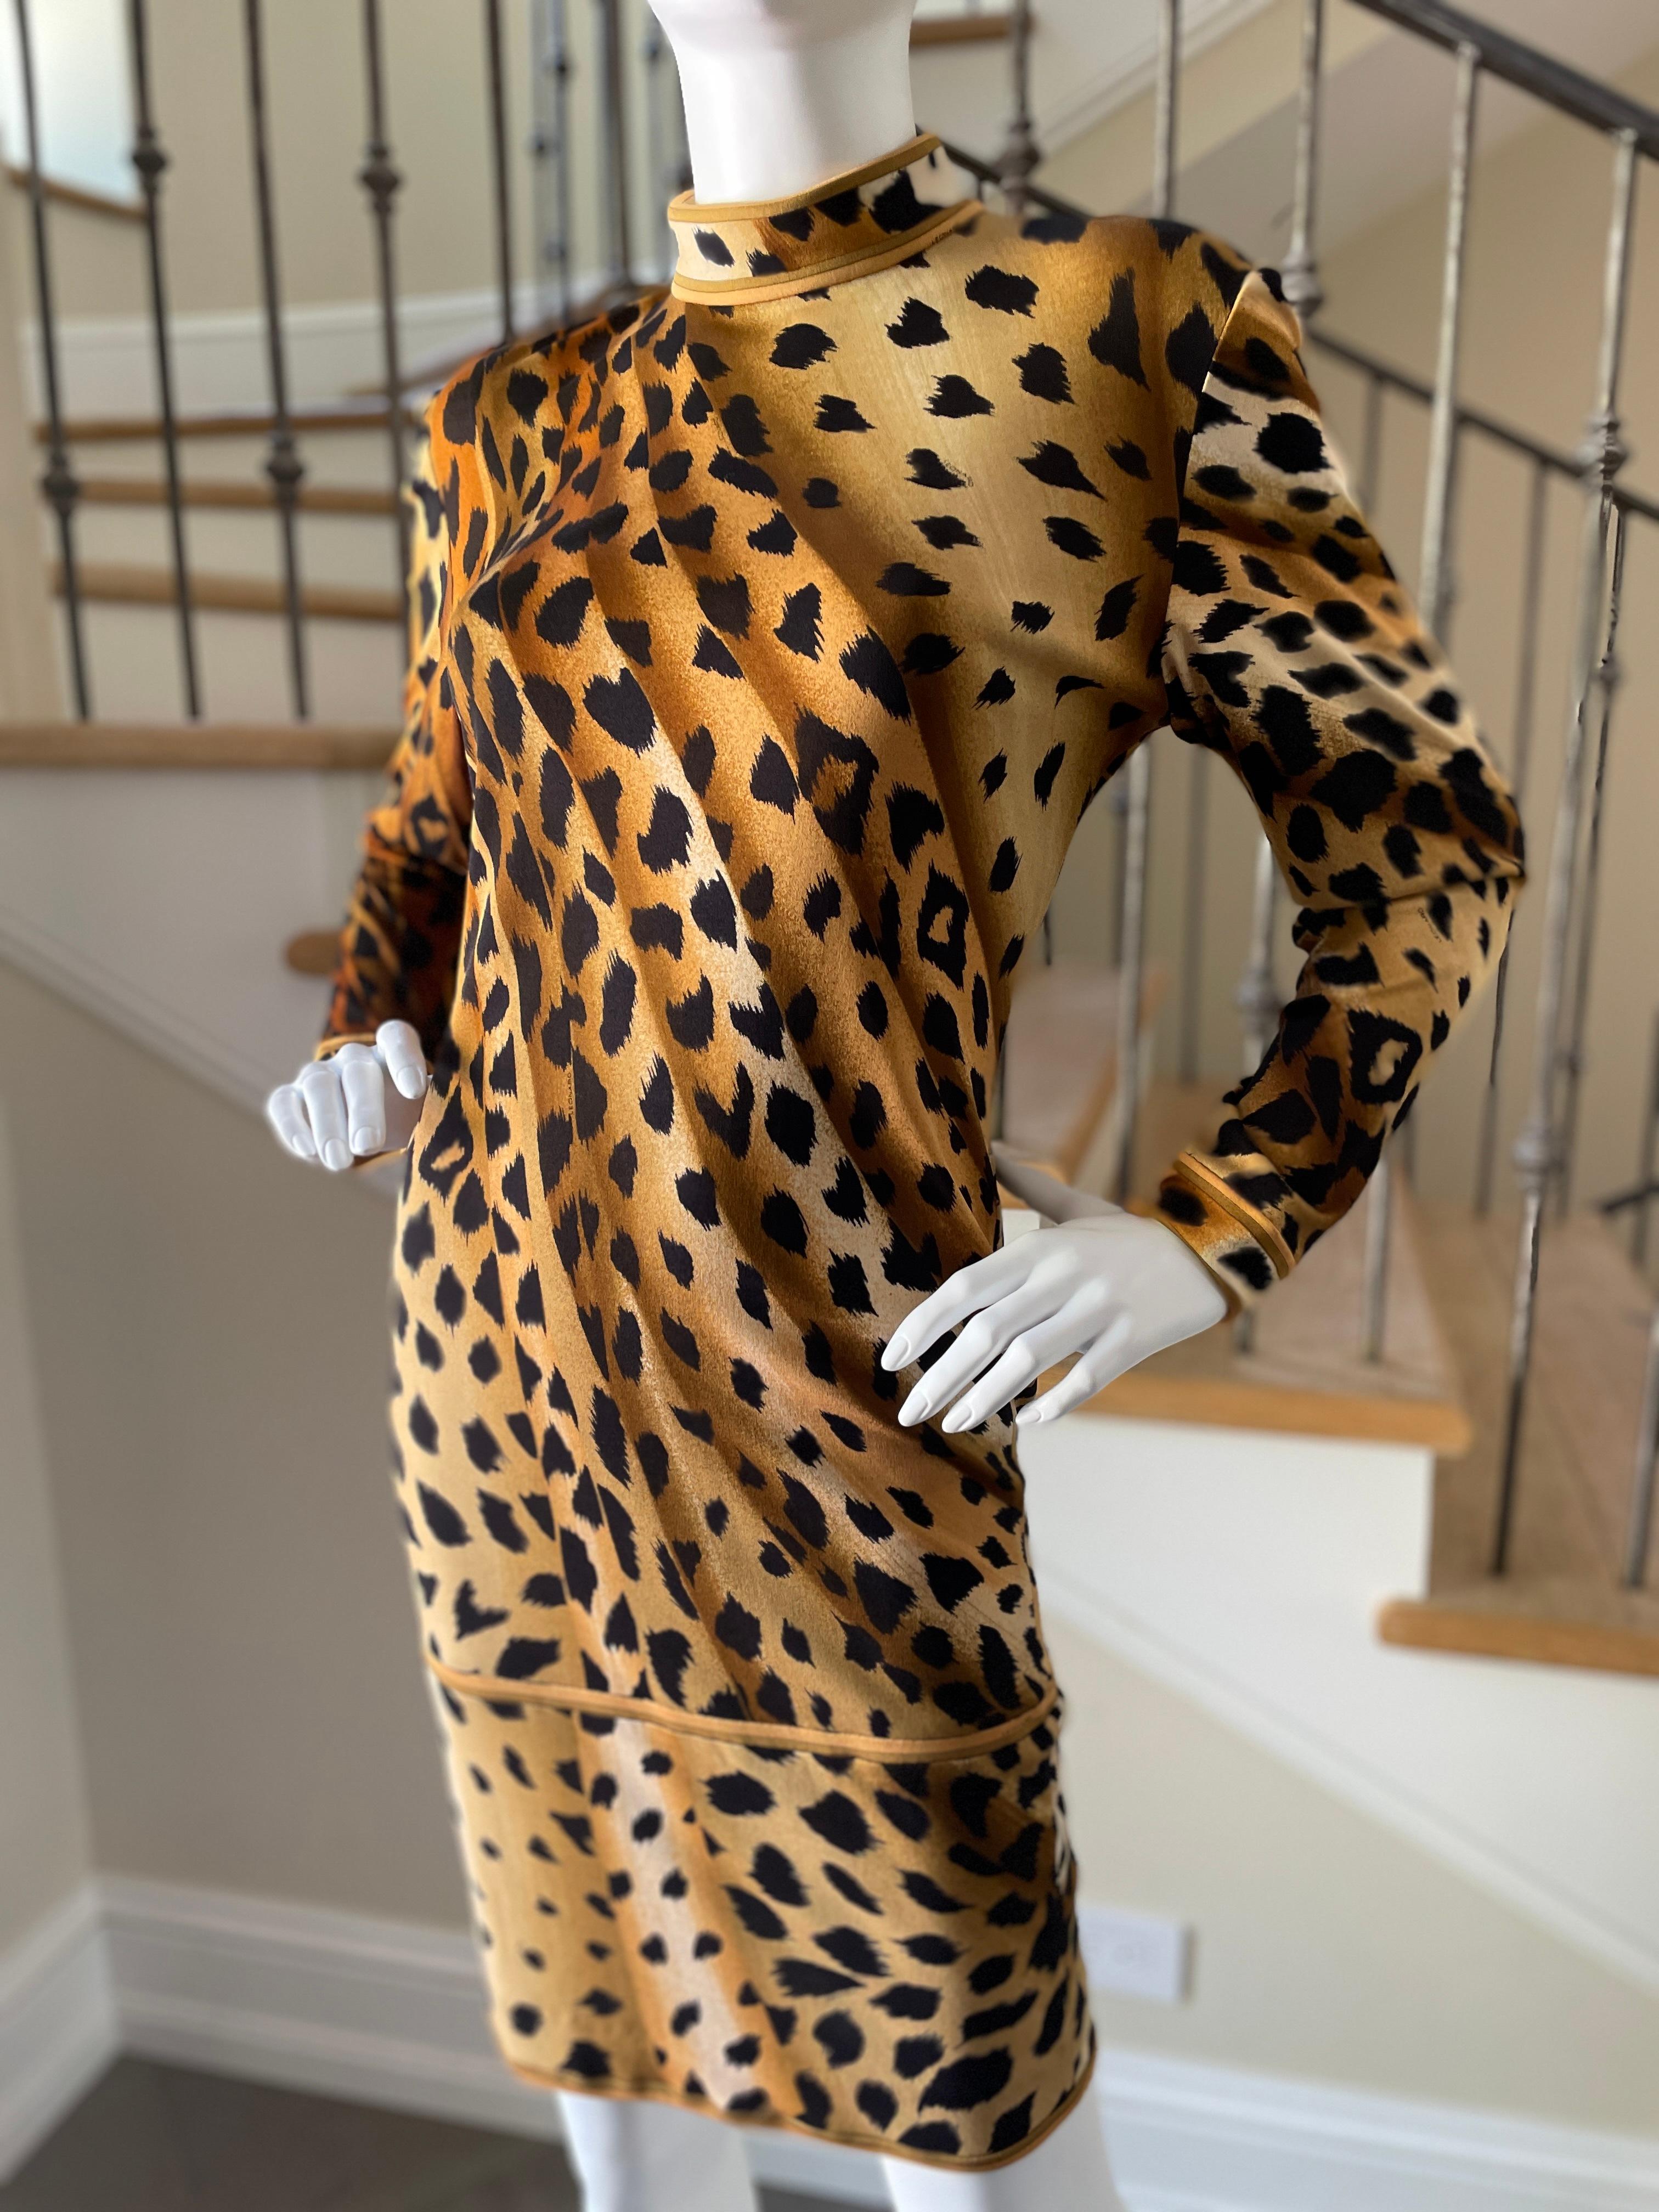 Leonard Paris Vintage 90's Long Sleeve Silk Jersey Leopard Print Dress
So pretty, please use the zoom lens to see details.

Leonard Paris was a contemporary of Pucci, both houses creating brilliant 60's patterns on silk jersey.
Both were very